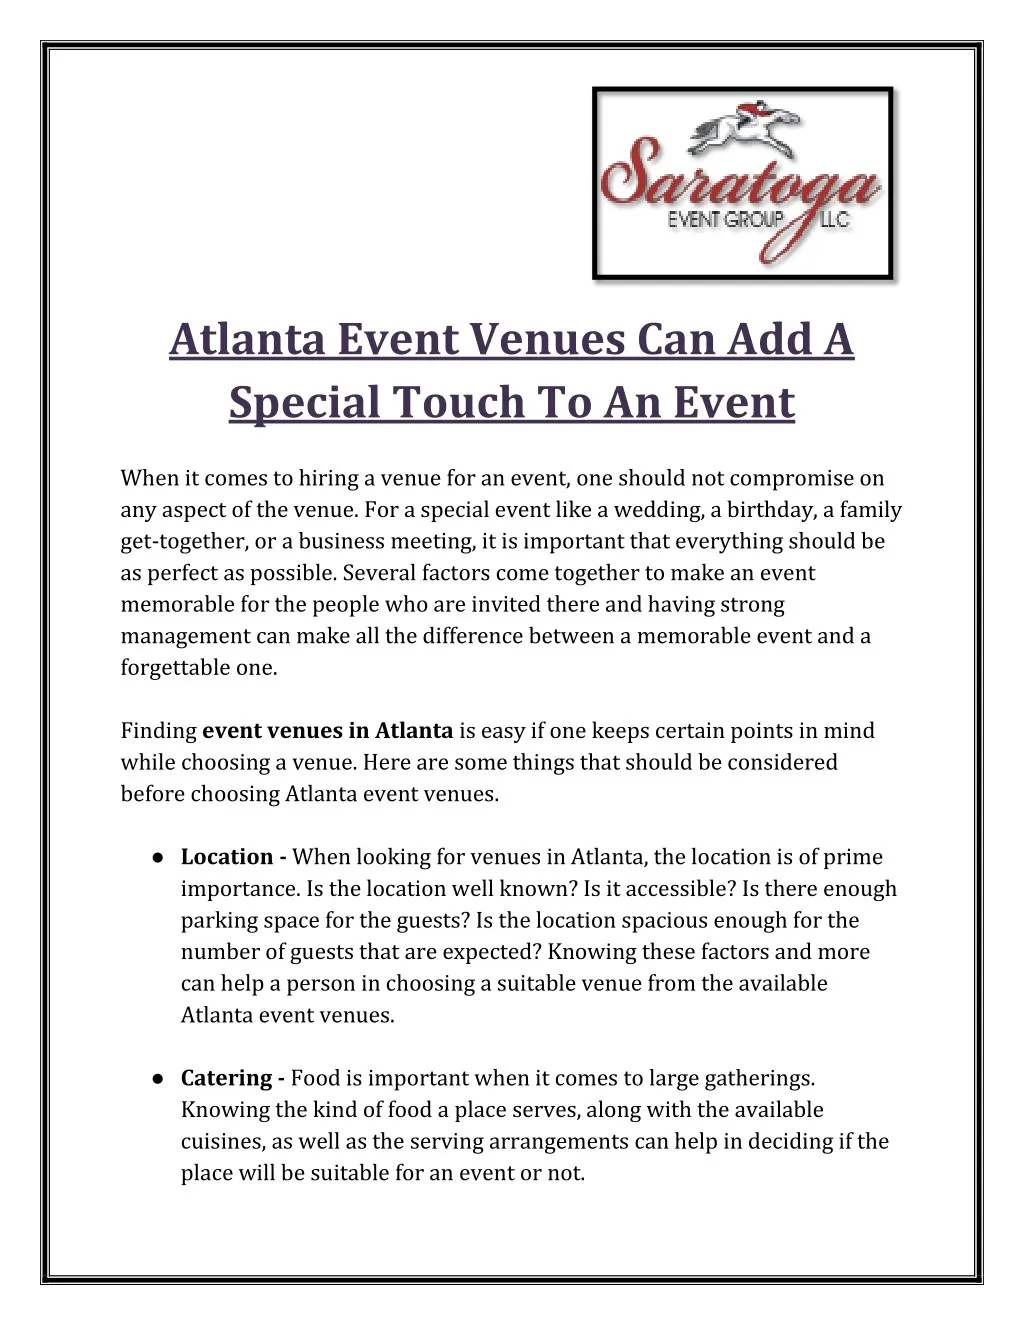 atlanta event venues can add a special touch